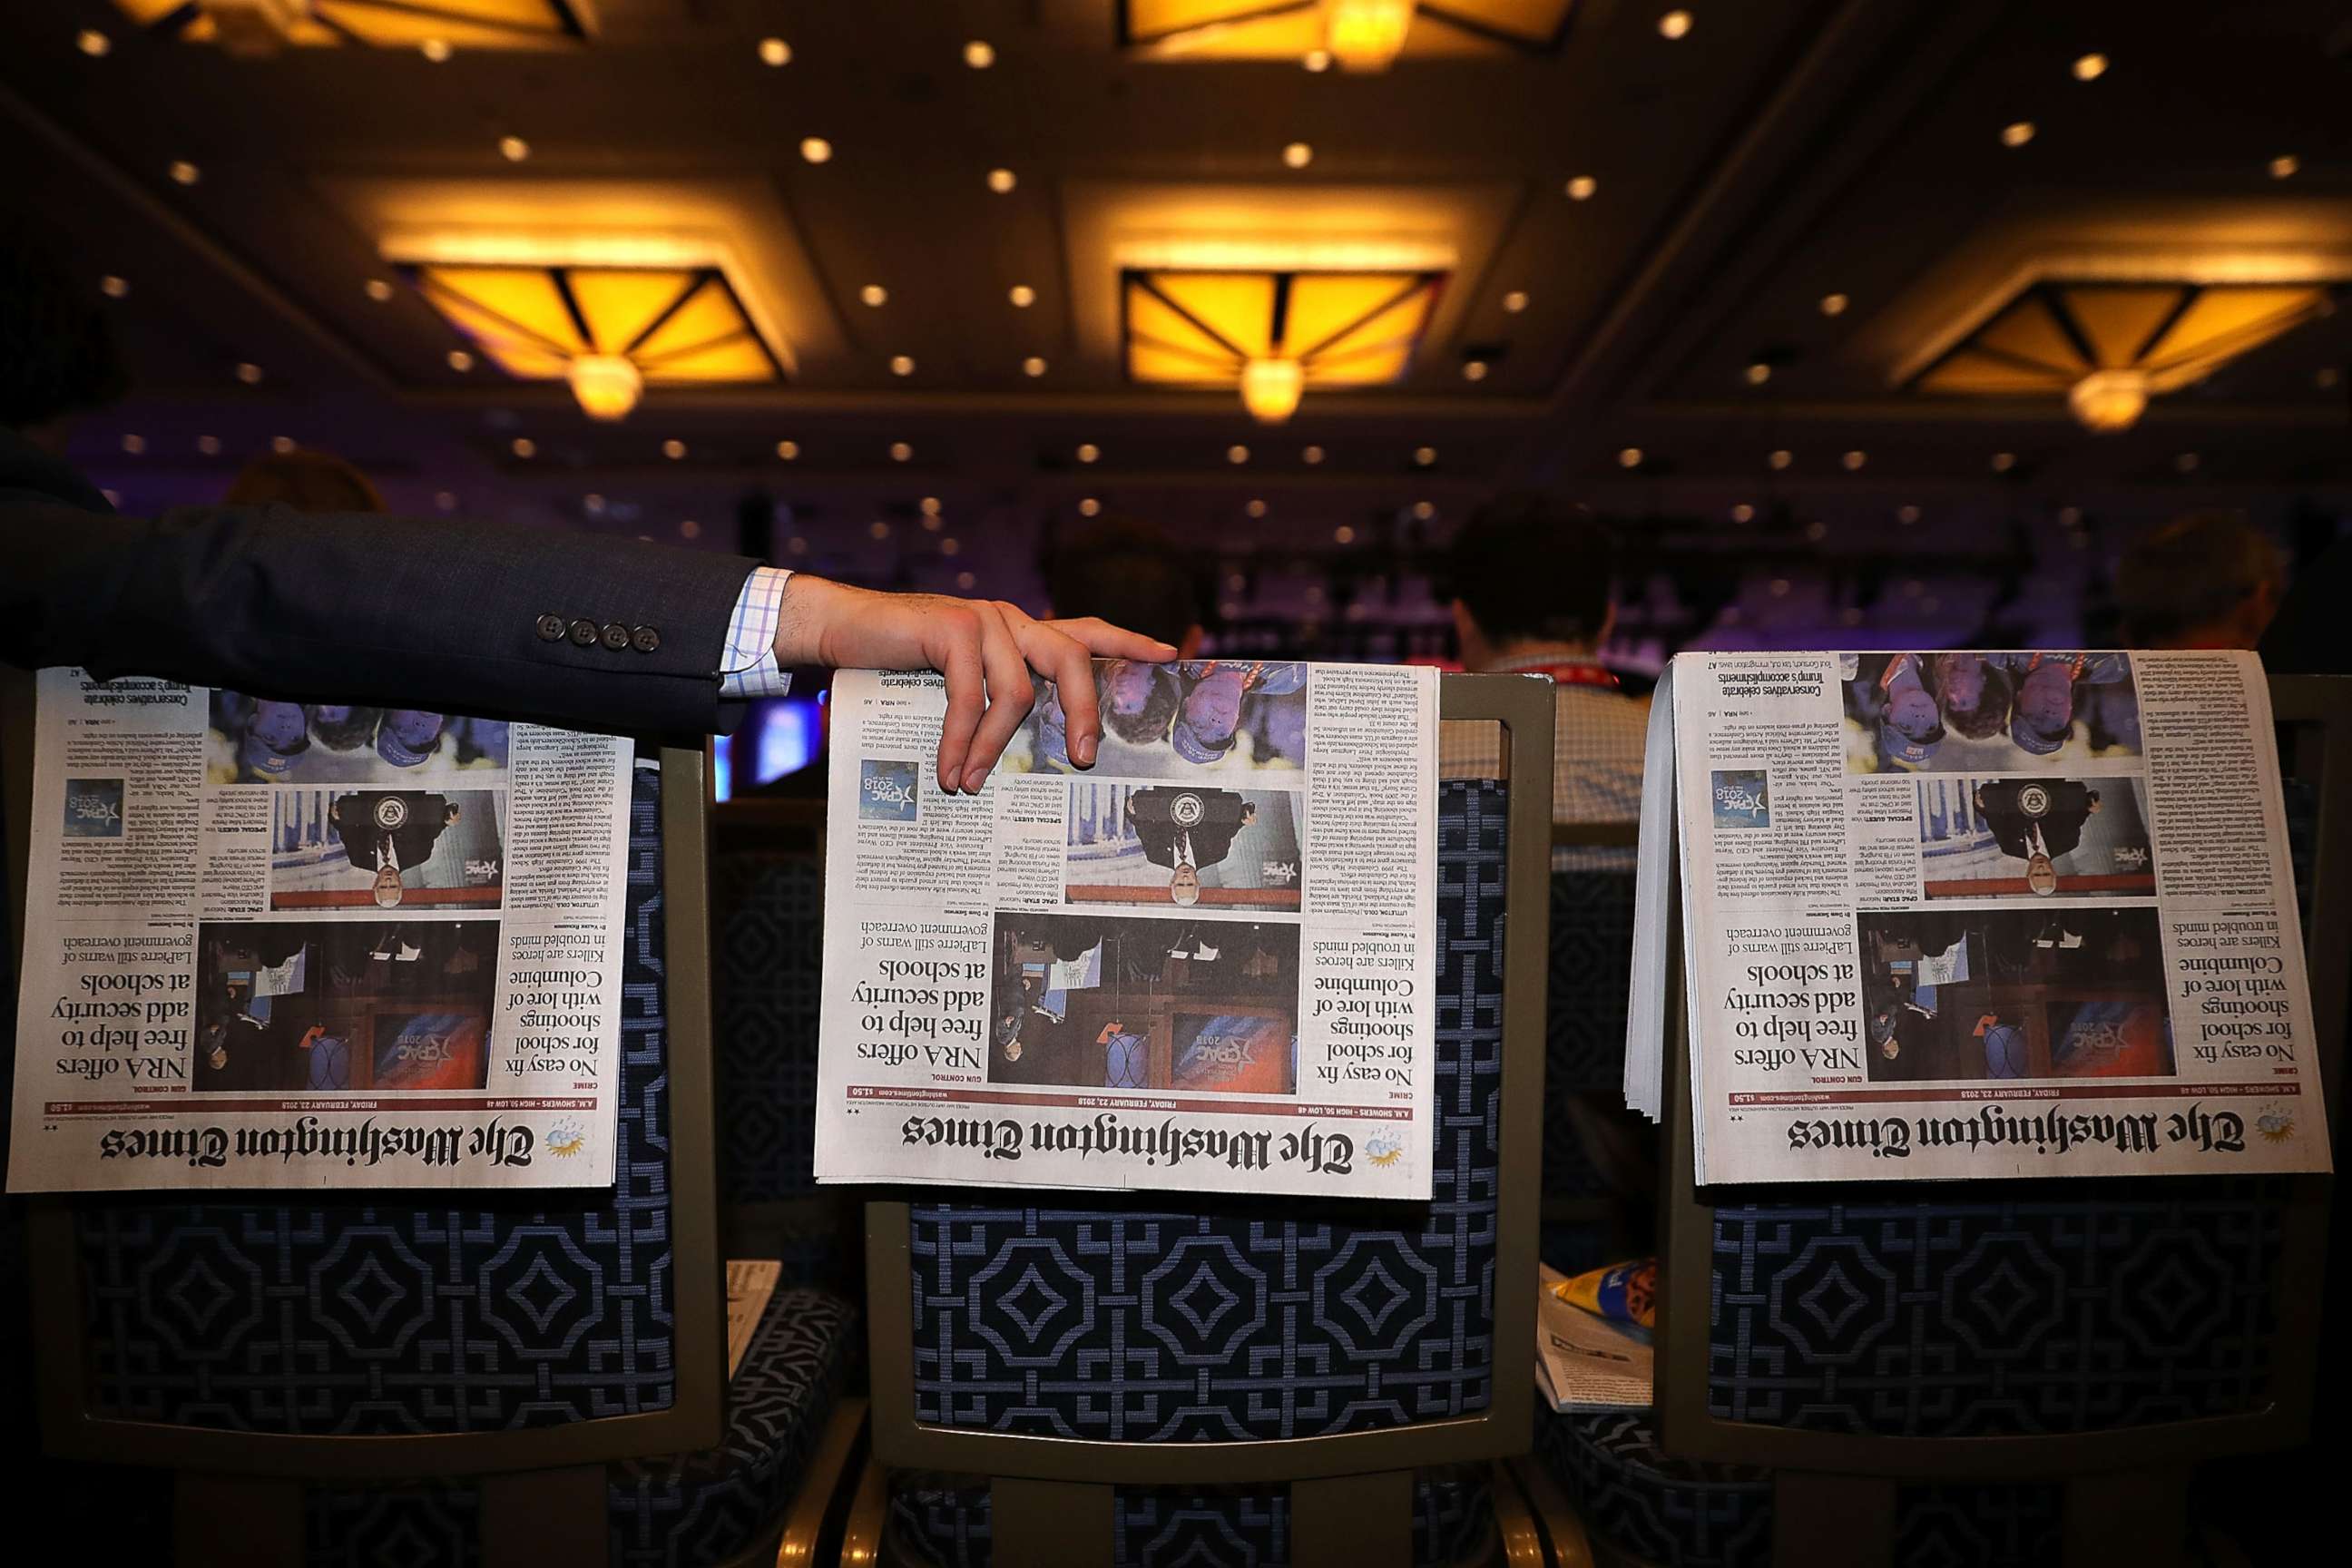 PHOTO: Newspapers are used as place-holders for people arriving early at the Conservative Political Action Conference at the Gaylord National Resort and Convention Center Feb. 23, 2018 in National Harbor, Md.